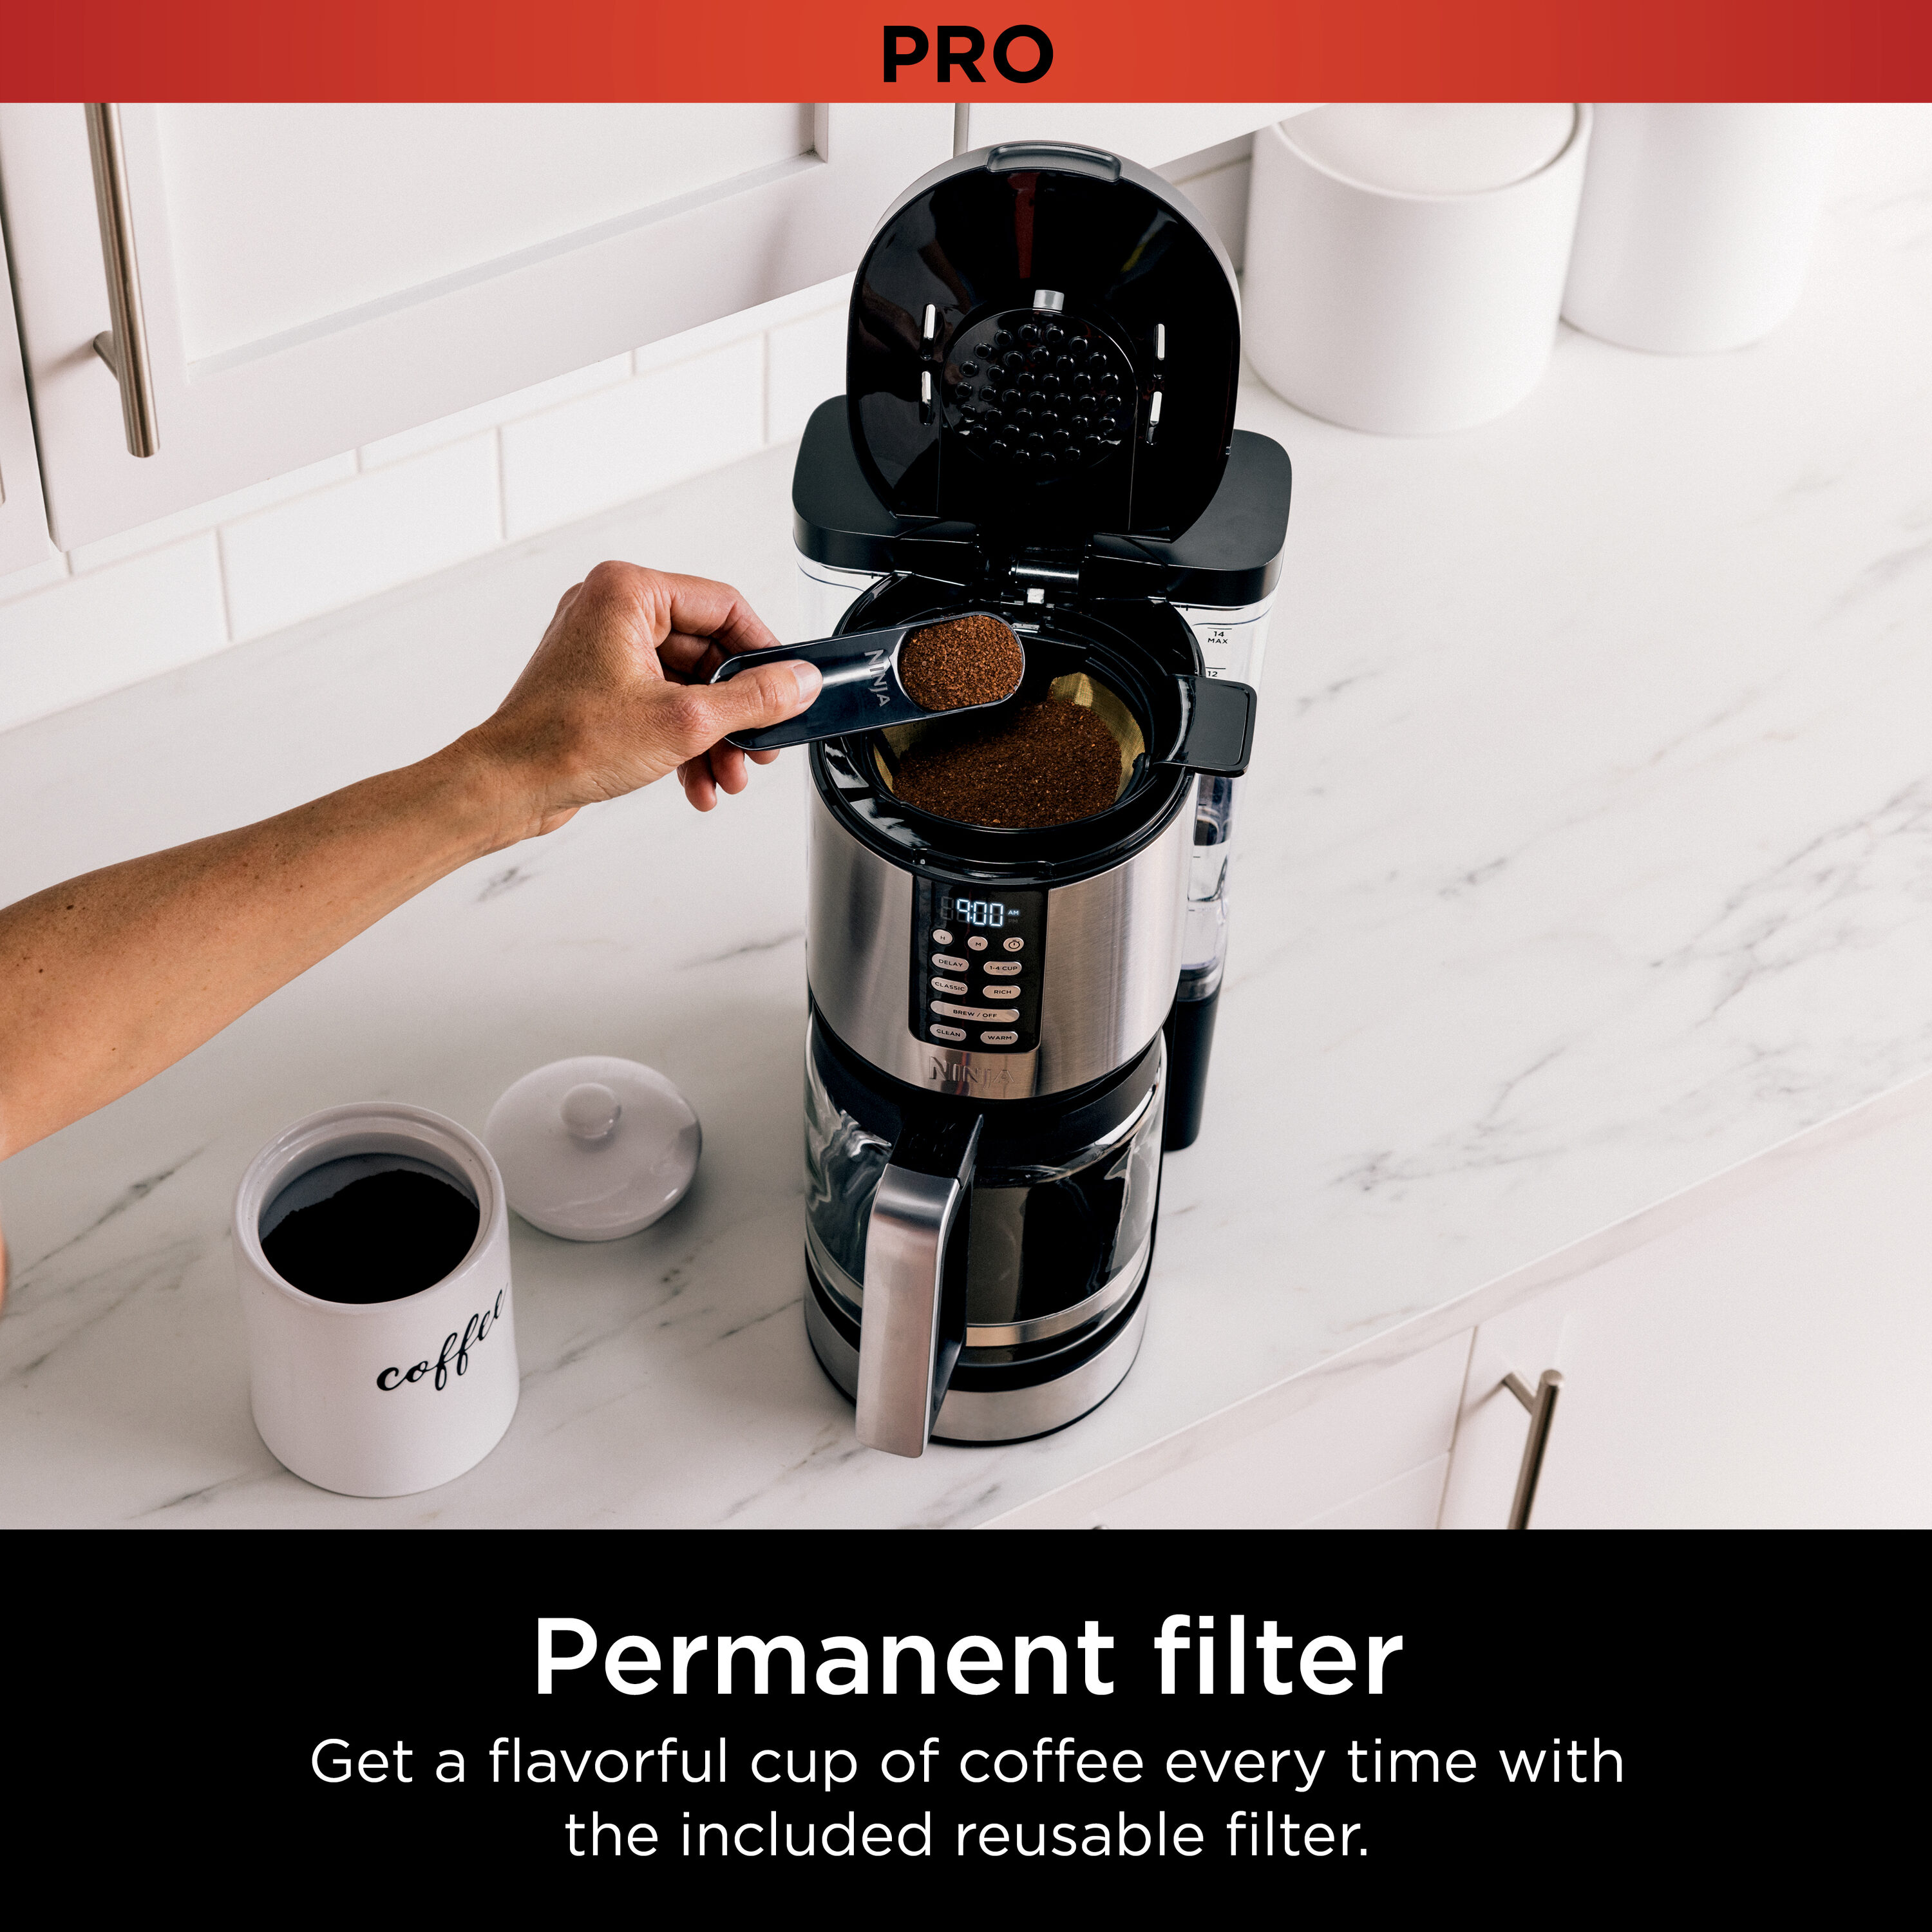 Goldtone Reusable 8-12 Cup Basket Filter Fits Black & Decker Coffee Machines and Brewers replaces Your Black+decker Reusable Coffee Filter and per